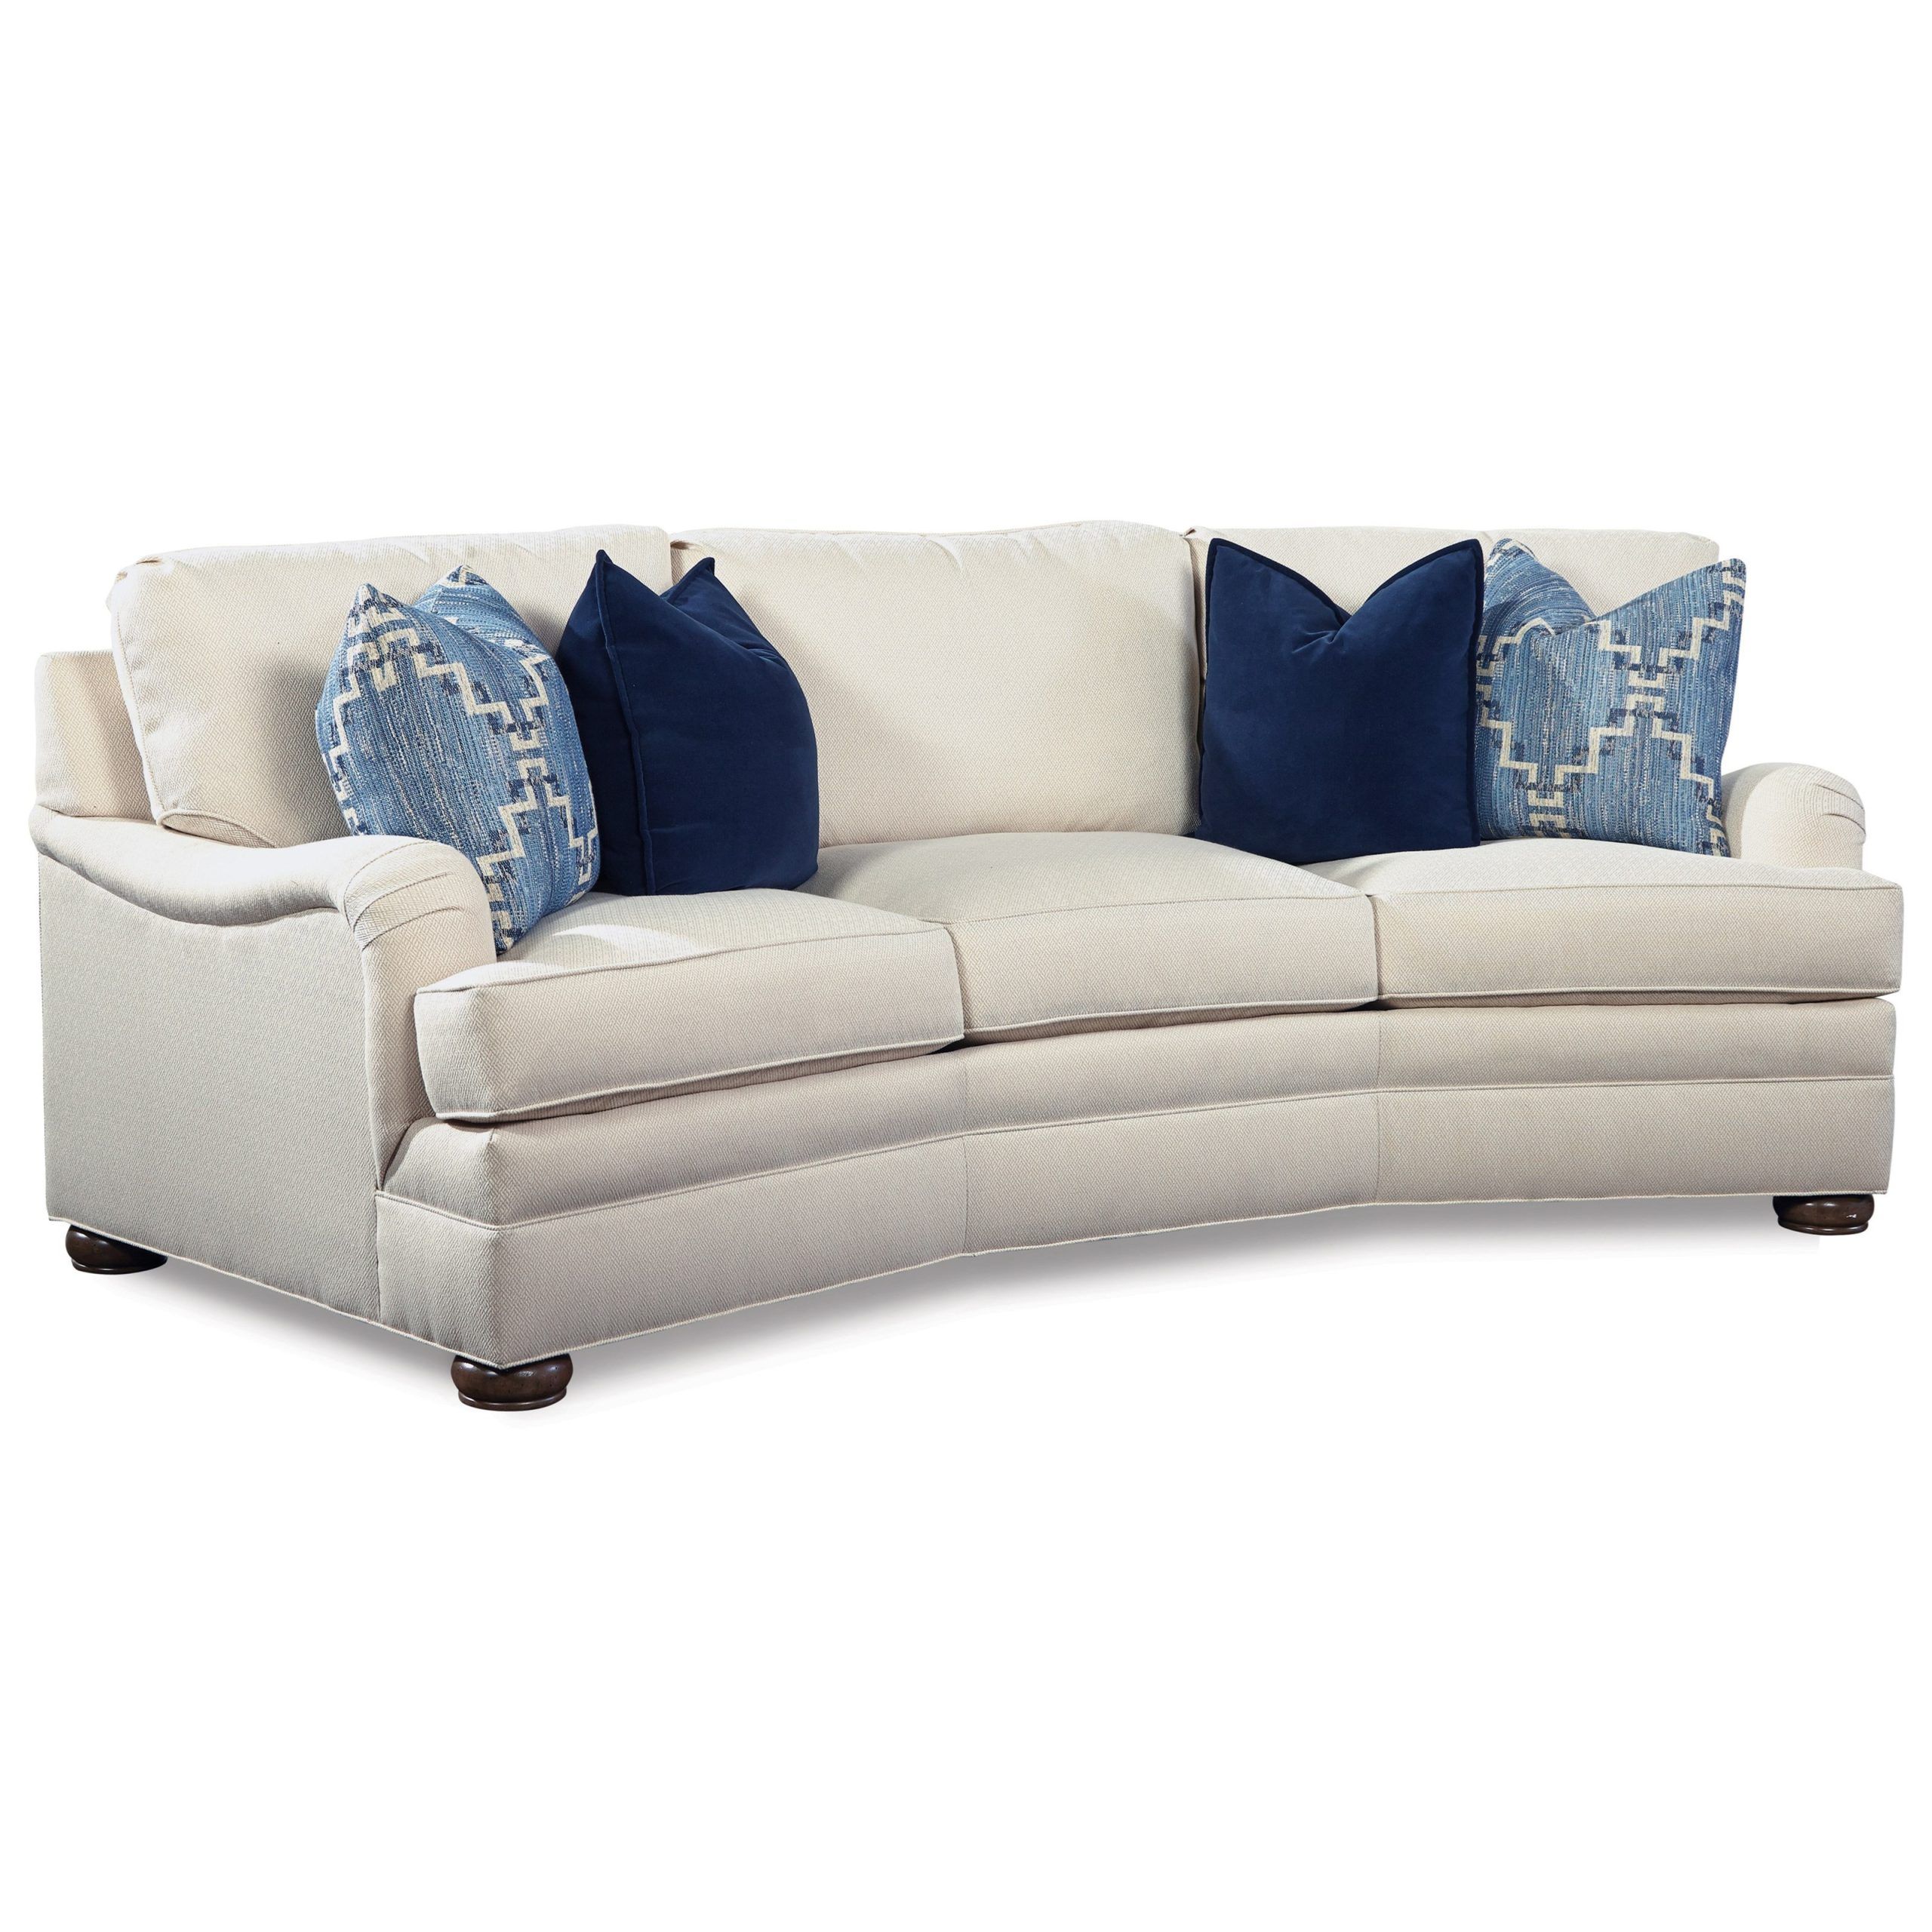 Huntington House 2061 Conversation Sofa With Curved Arms | Ahfa Pertaining To Sofas With Curved Arms (Gallery 2 of 20)